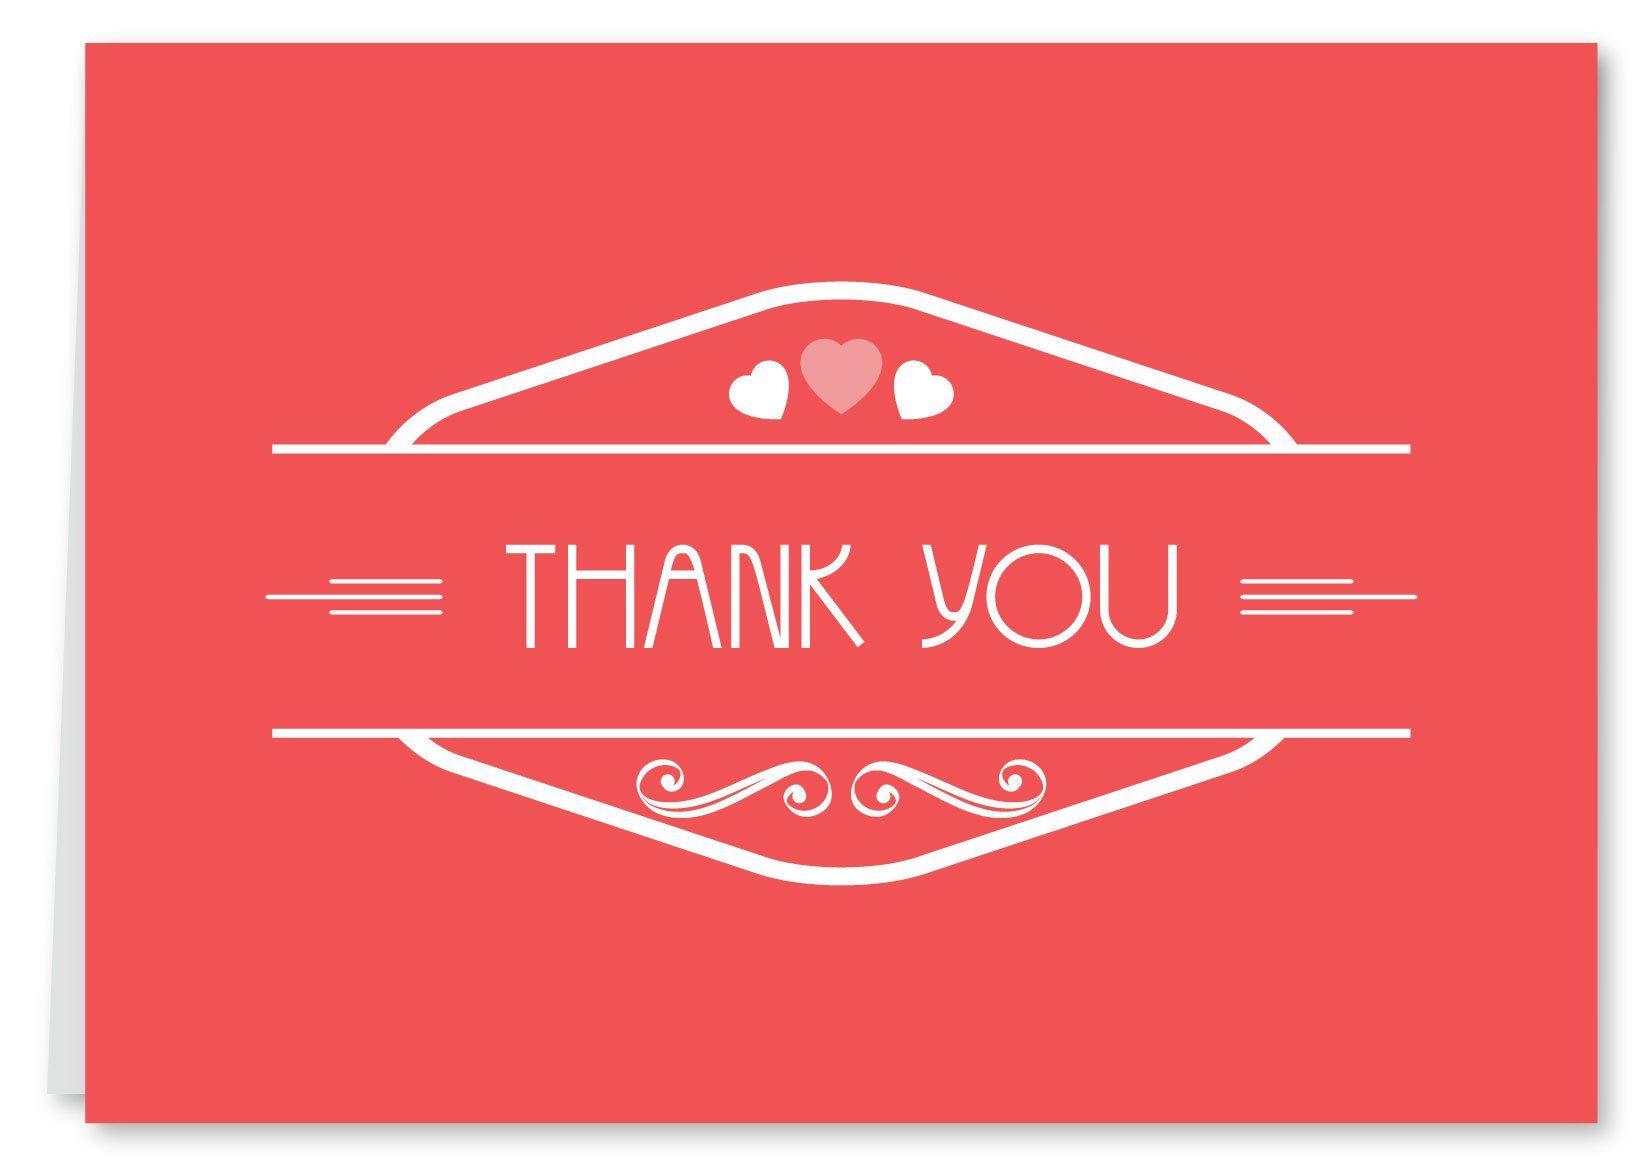 Thank You Red Logo - Thank You Cards & Vouchers : Buy Thank You Vouchers & Cards Online ...